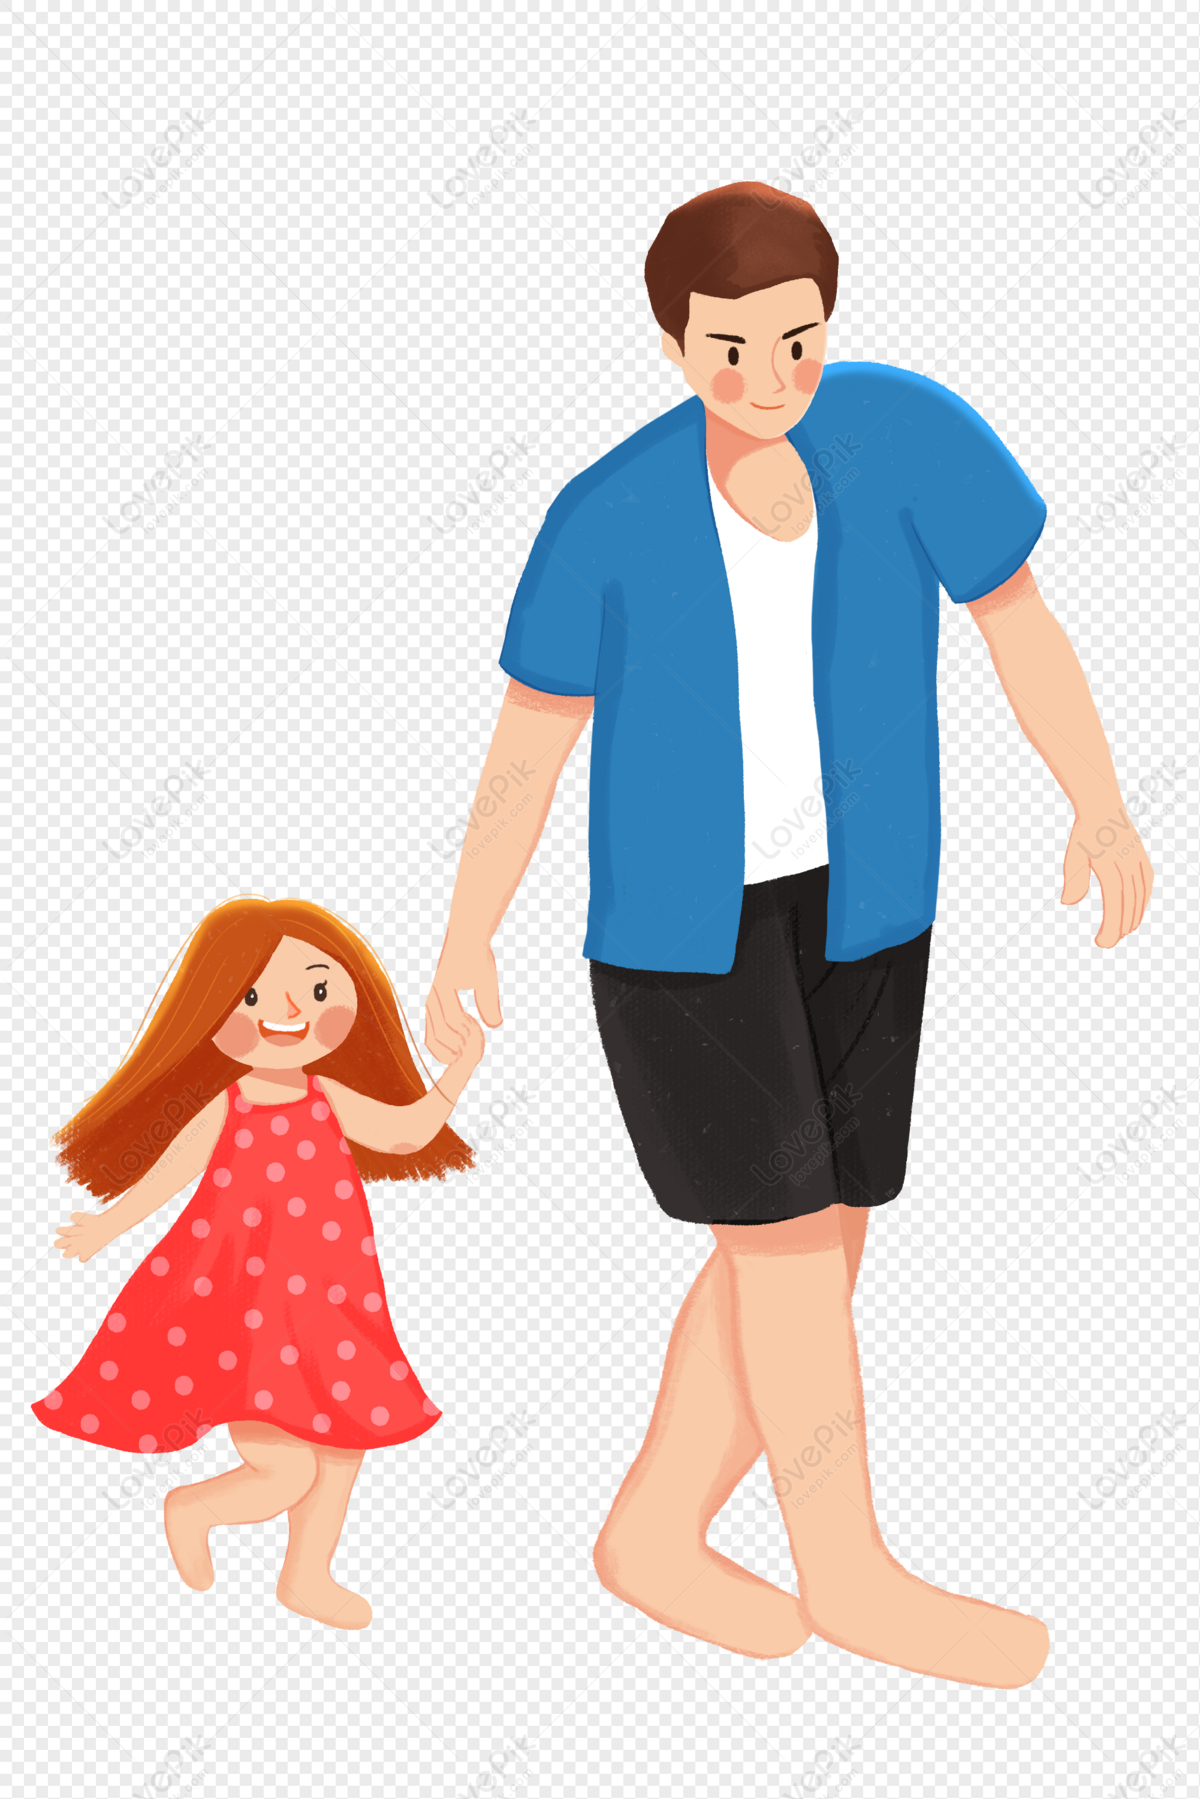 Dad Is Holding Her Daughters Hand PNG Picture And Clipart Image For Free  Download - Lovepik | 401394245